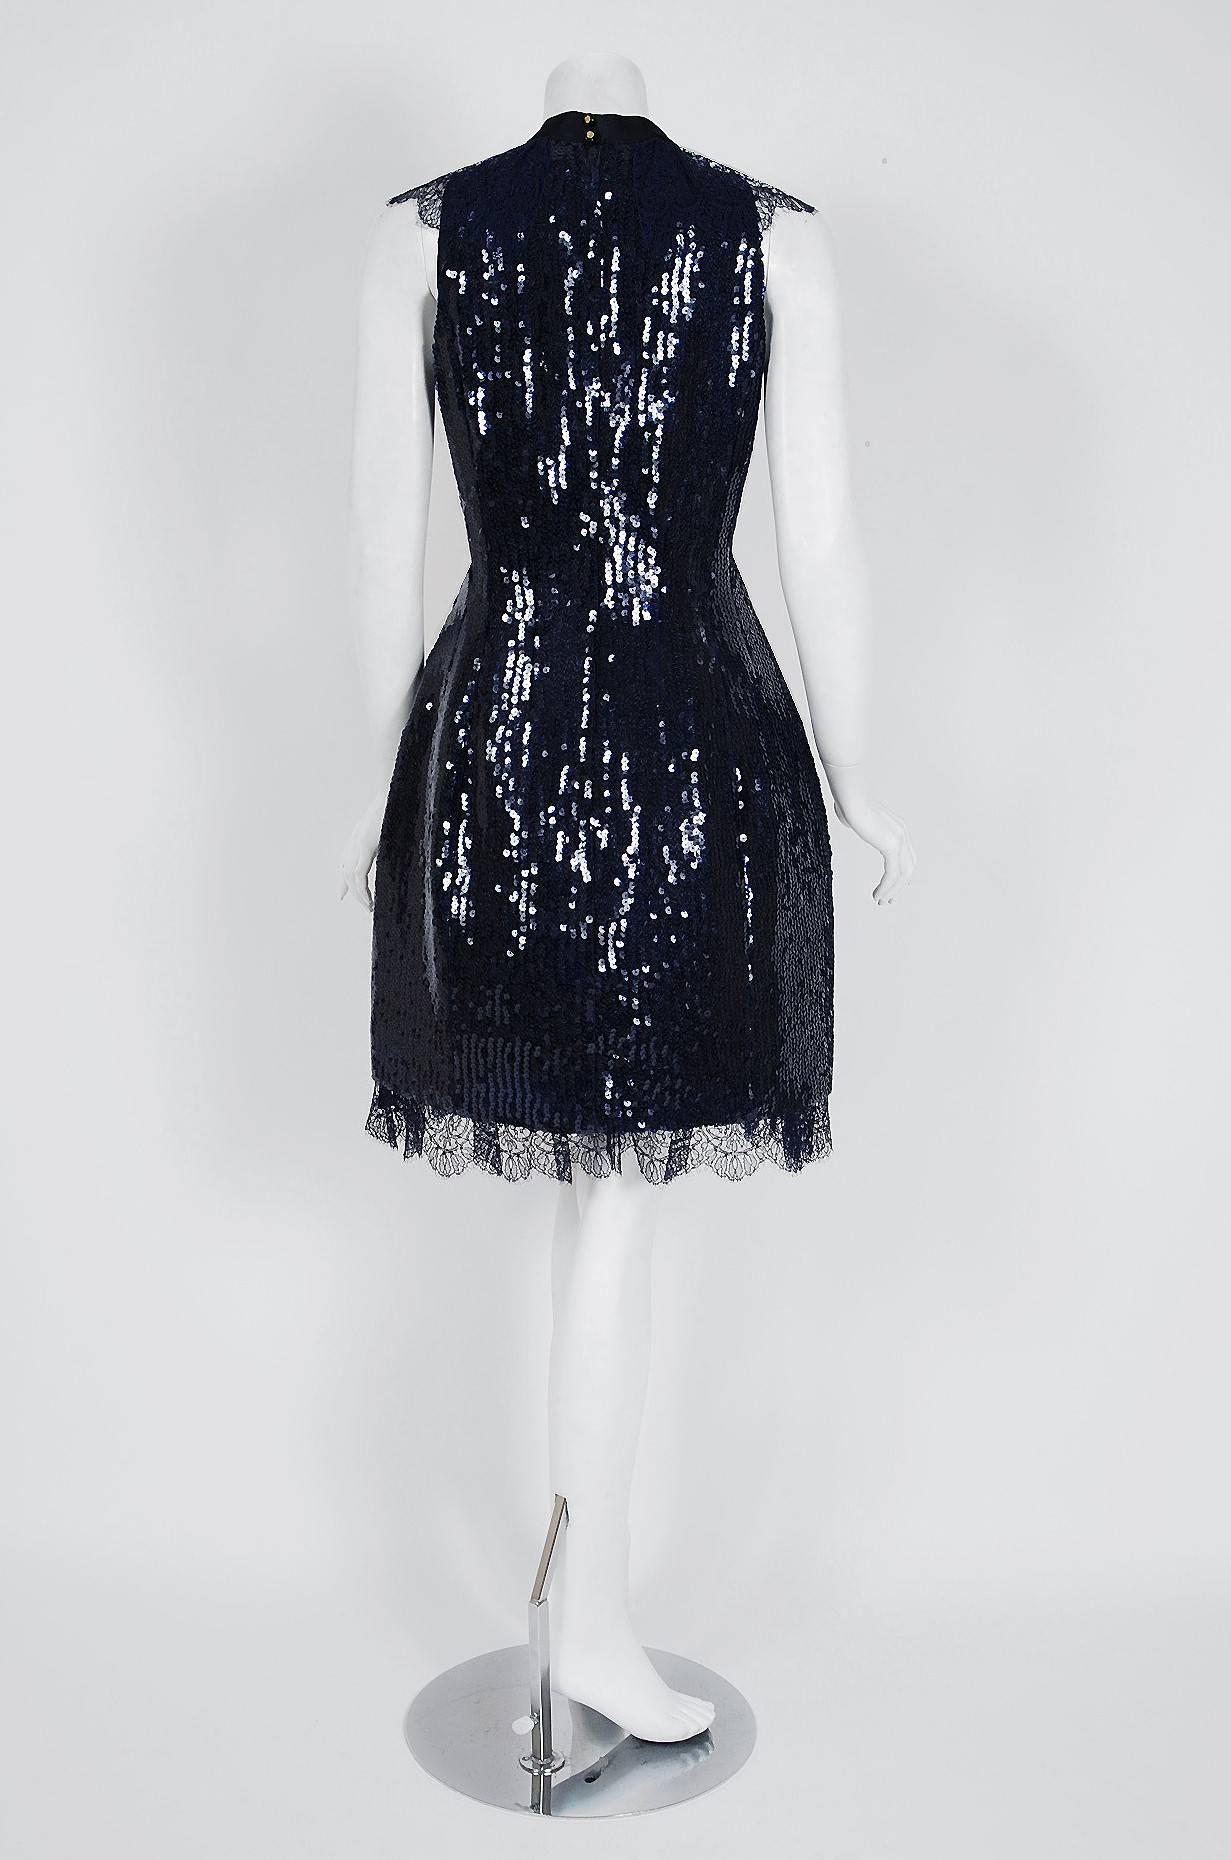 1987 Chanel Runway Navy-Blue Sequin Satin & Chantilly-Lace Cocktail Mini Dress 1